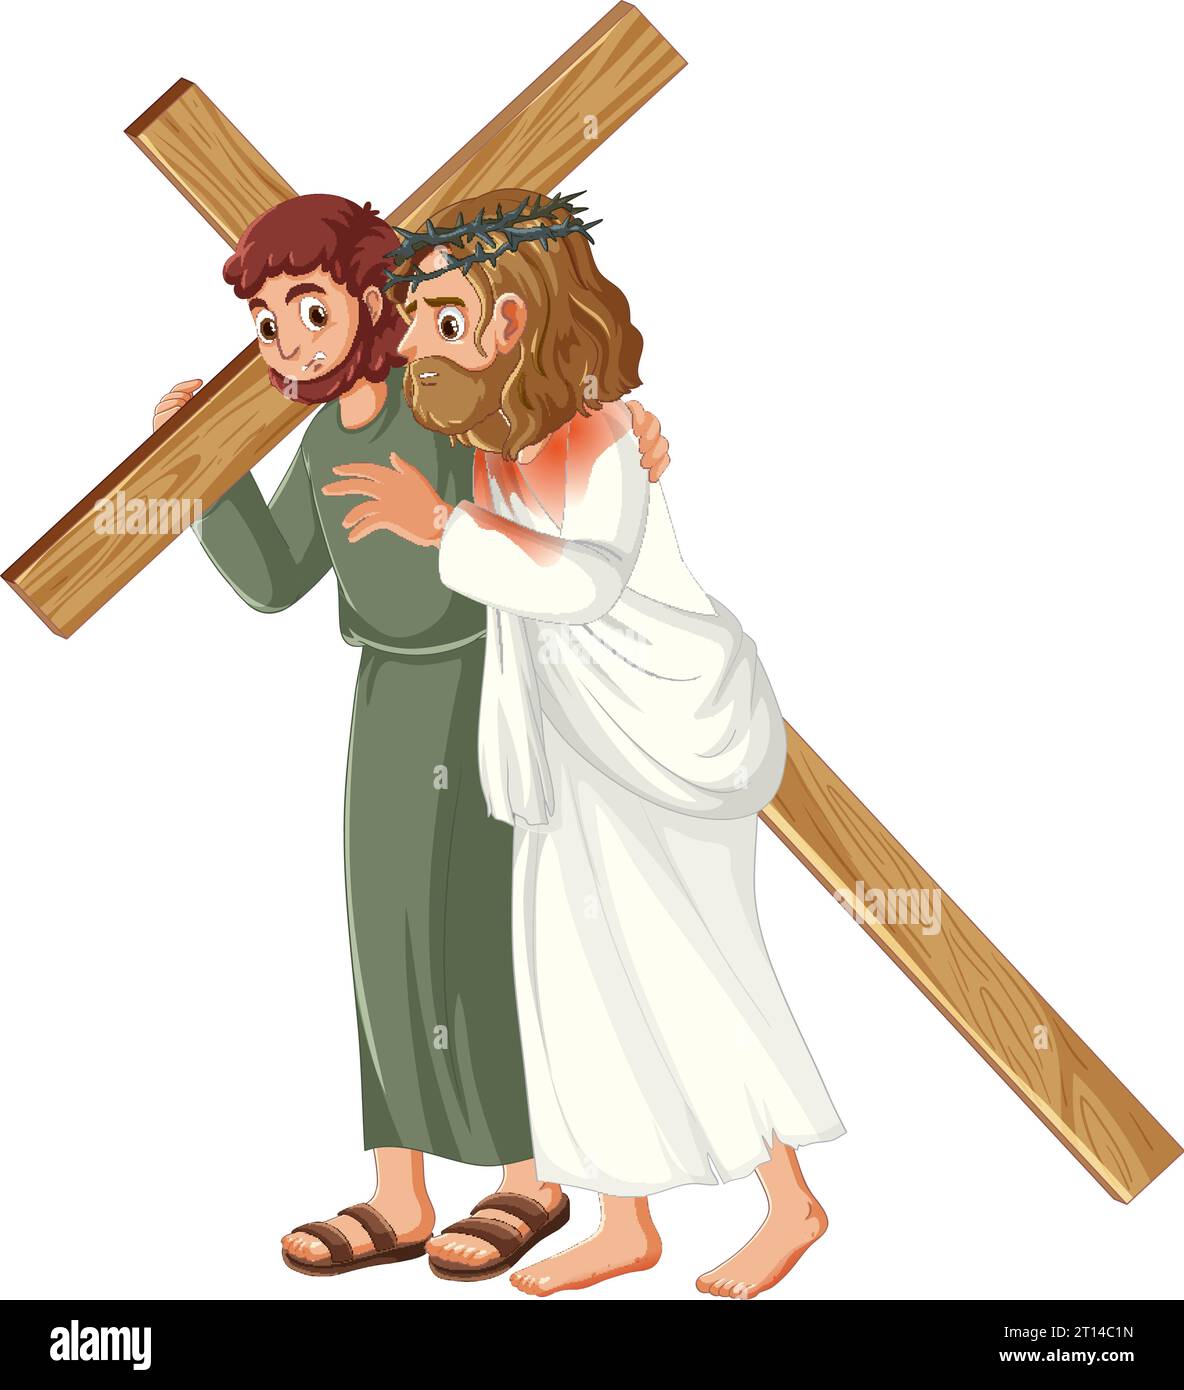 Illustration of Simon helping Jesus carry the cross Stock Vector Image ...